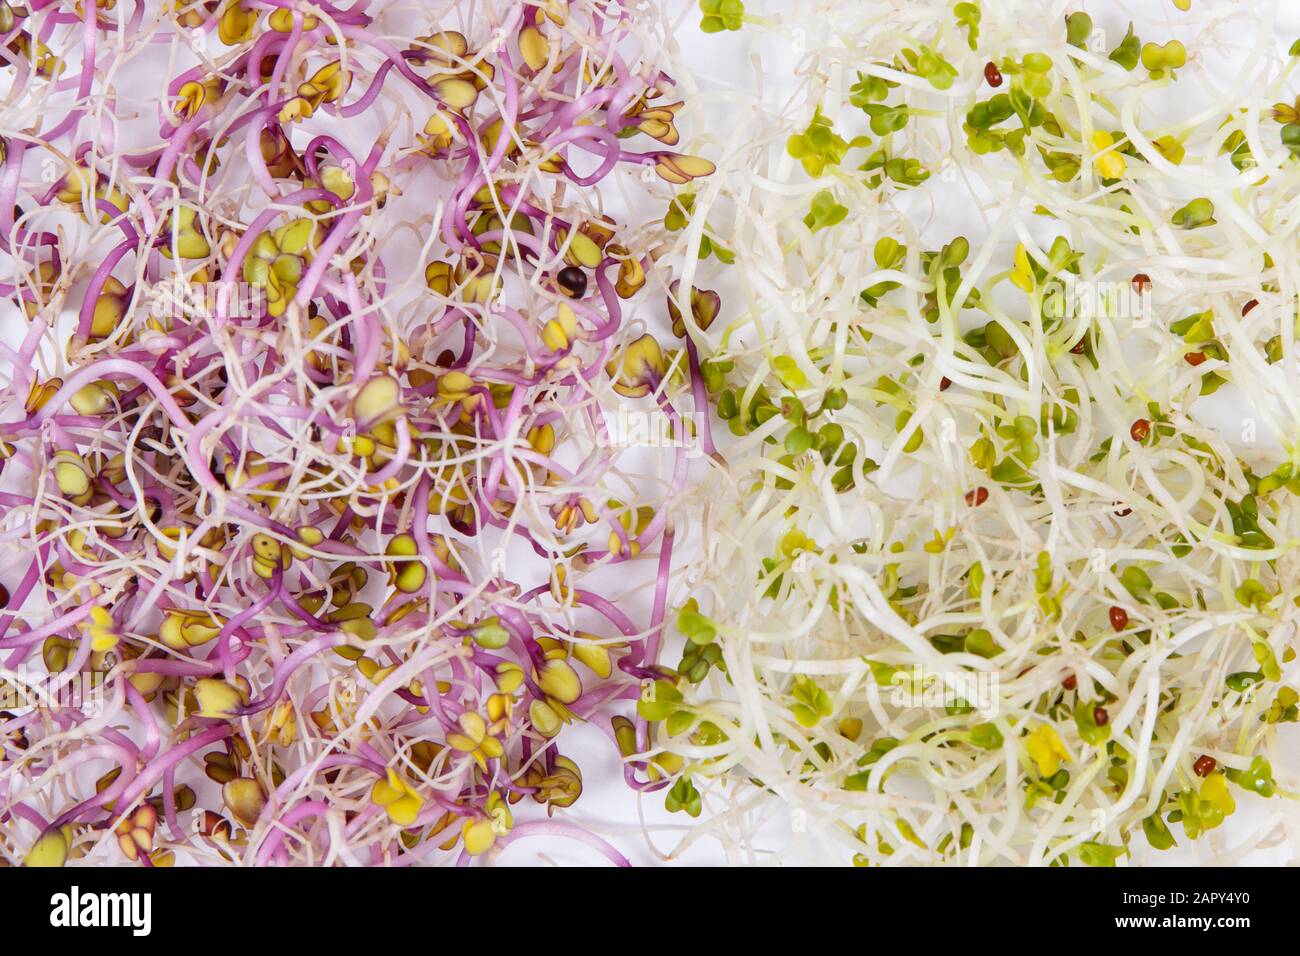 Different types of healthy sprouts containing natural vitamins and minerals. White background Stock Photo